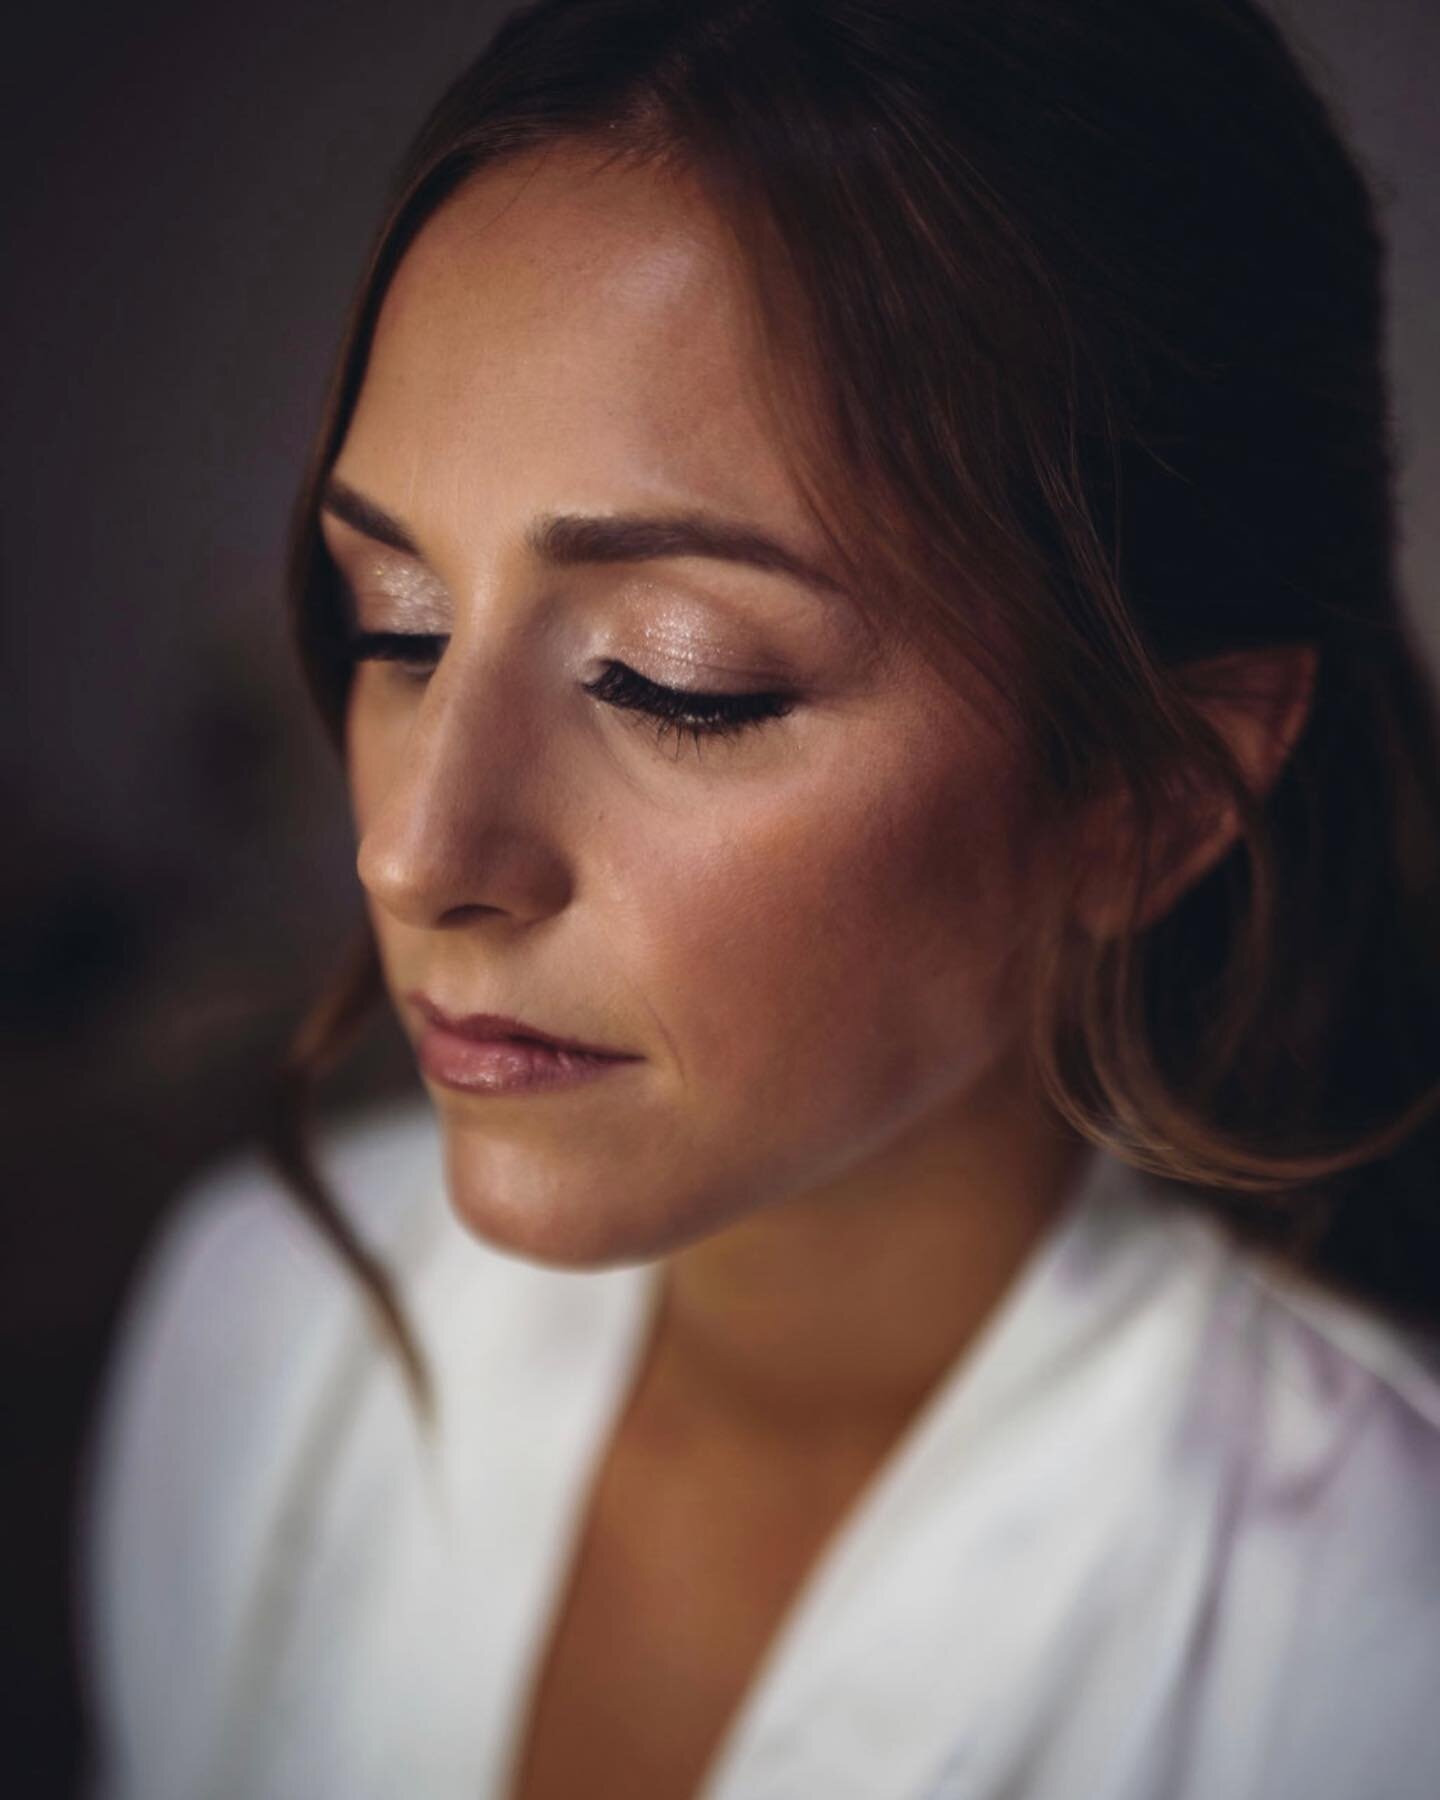 Nothing better than getting the pictures of my brides from their big day😍 these are gold!
&bull;
For bookings &amp; inquiries please email maddiejbeauty@gmail.com
Bride: @_catiecribbs 
Hair &amp; Makeup: @maddiejbeauty 
Photography: @fleetstreetstud